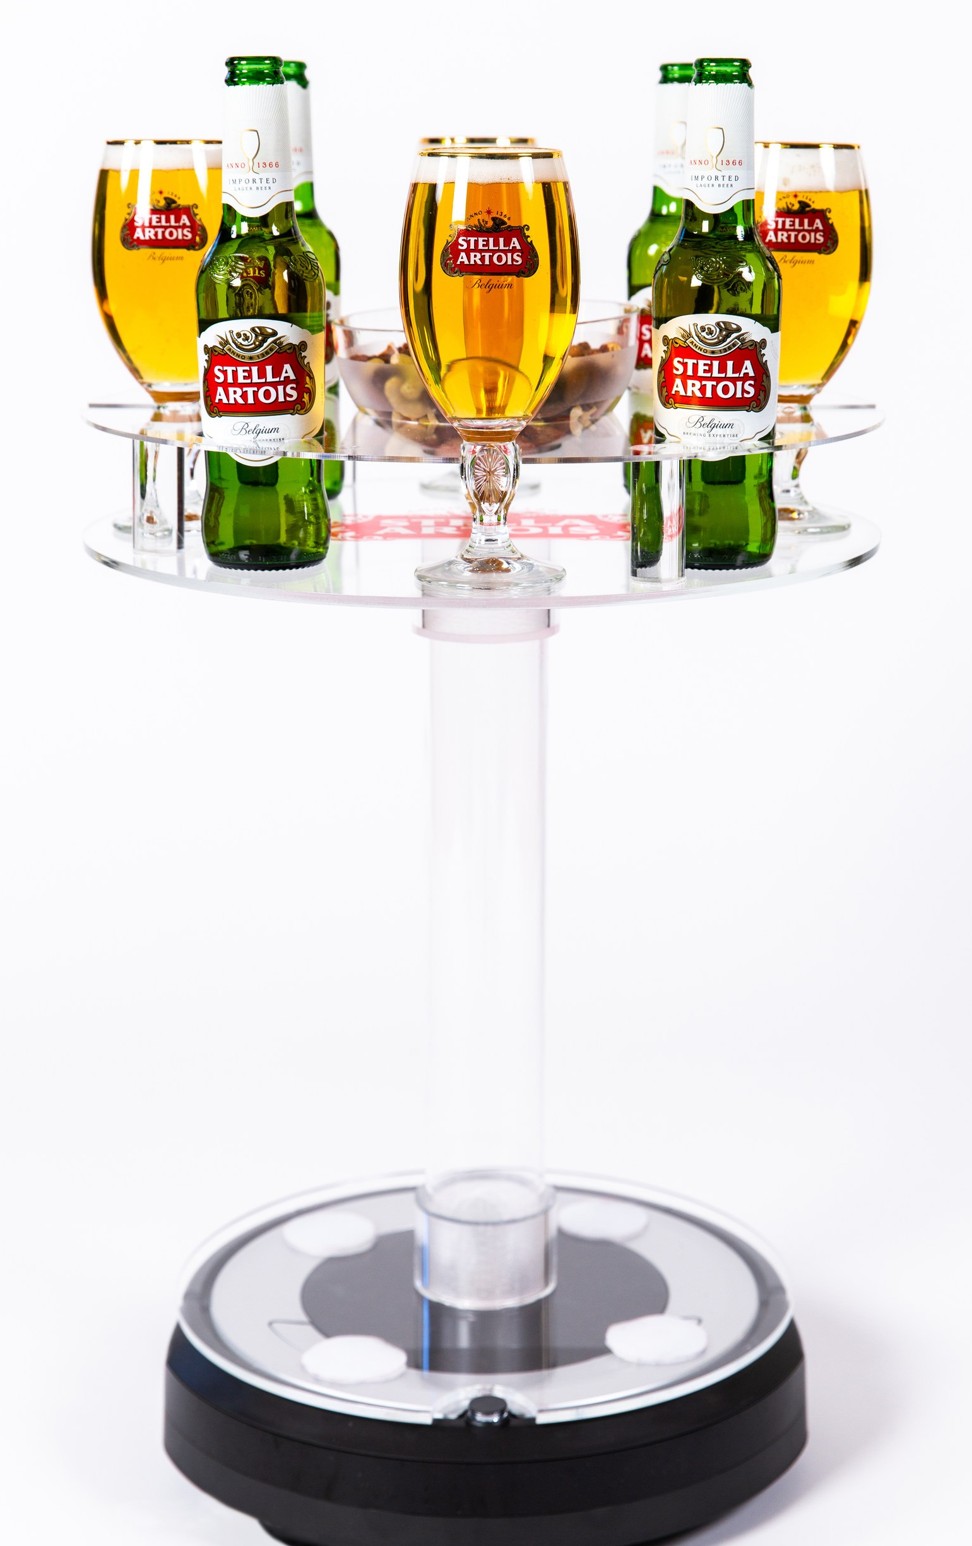 B.A.R.T, the robotic bartender from Stella Artois, which serves drinks and snacks – and sweeps up as it goes.